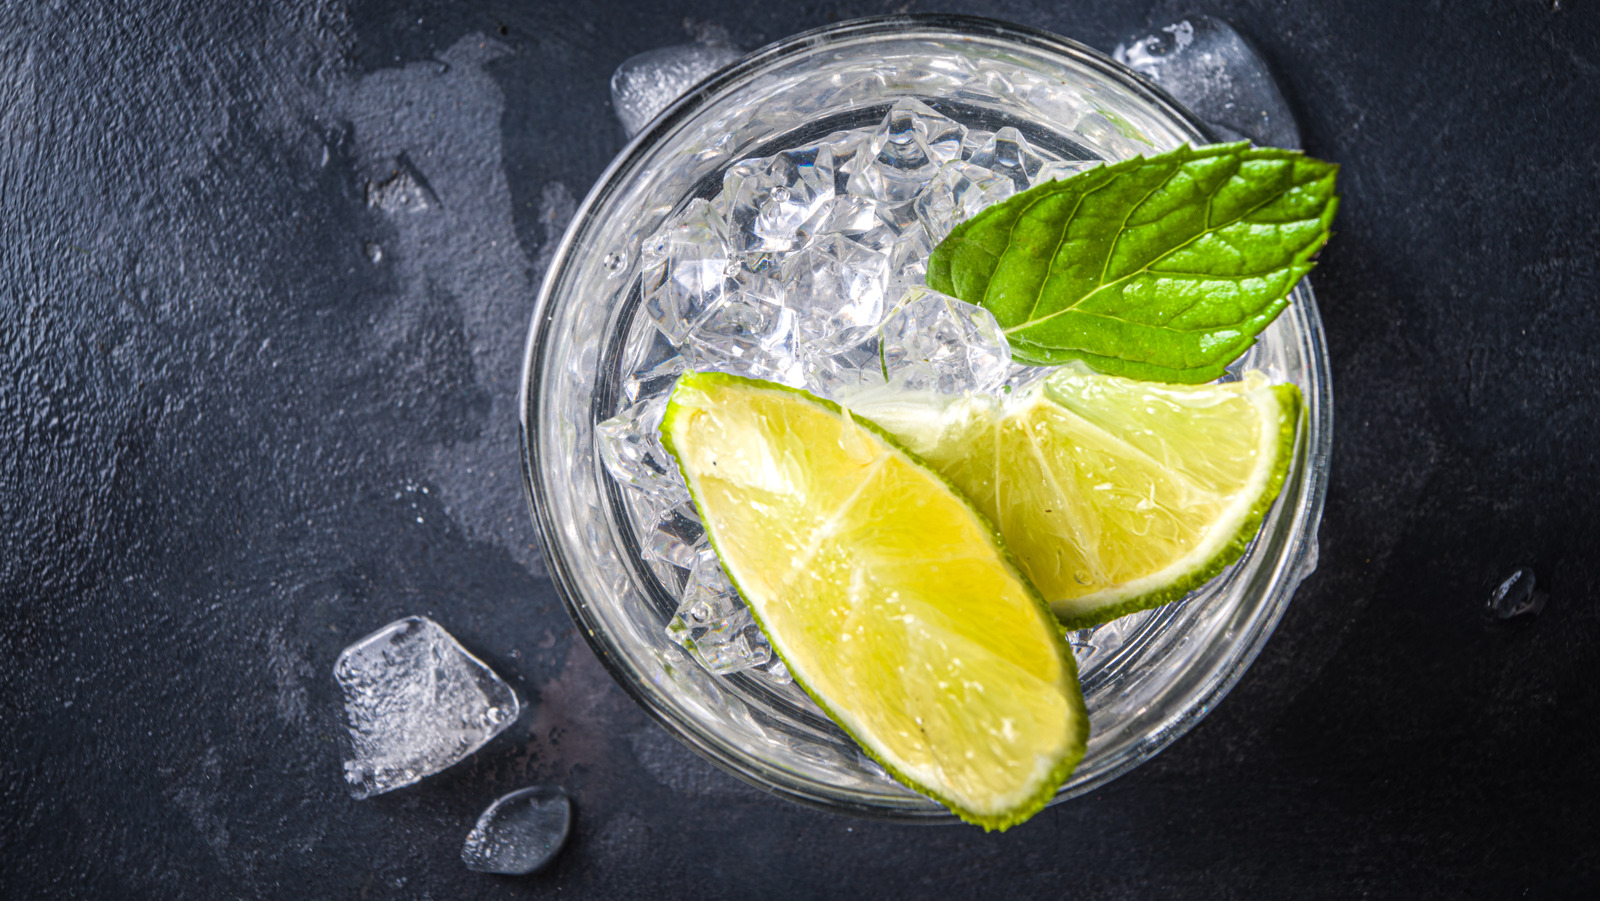 12 Drinks To Mix With Vodka, Ranked